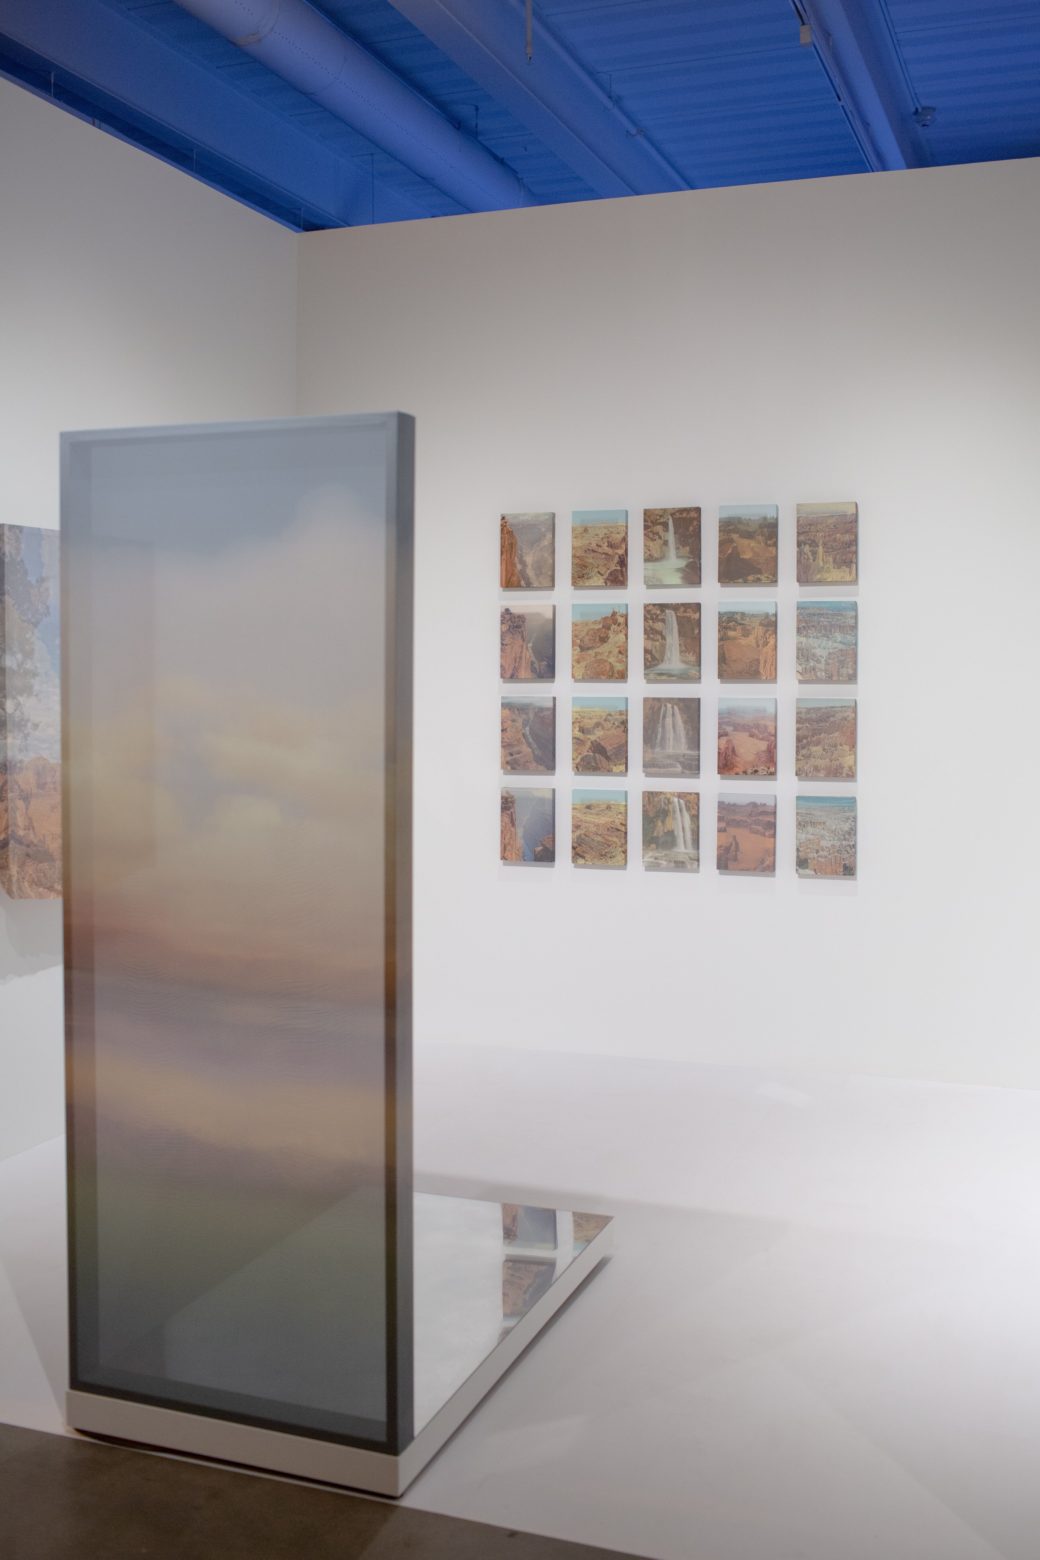 A vertical silk canvas stands in front of a wall with 20 small landscapes hung on it in a grid